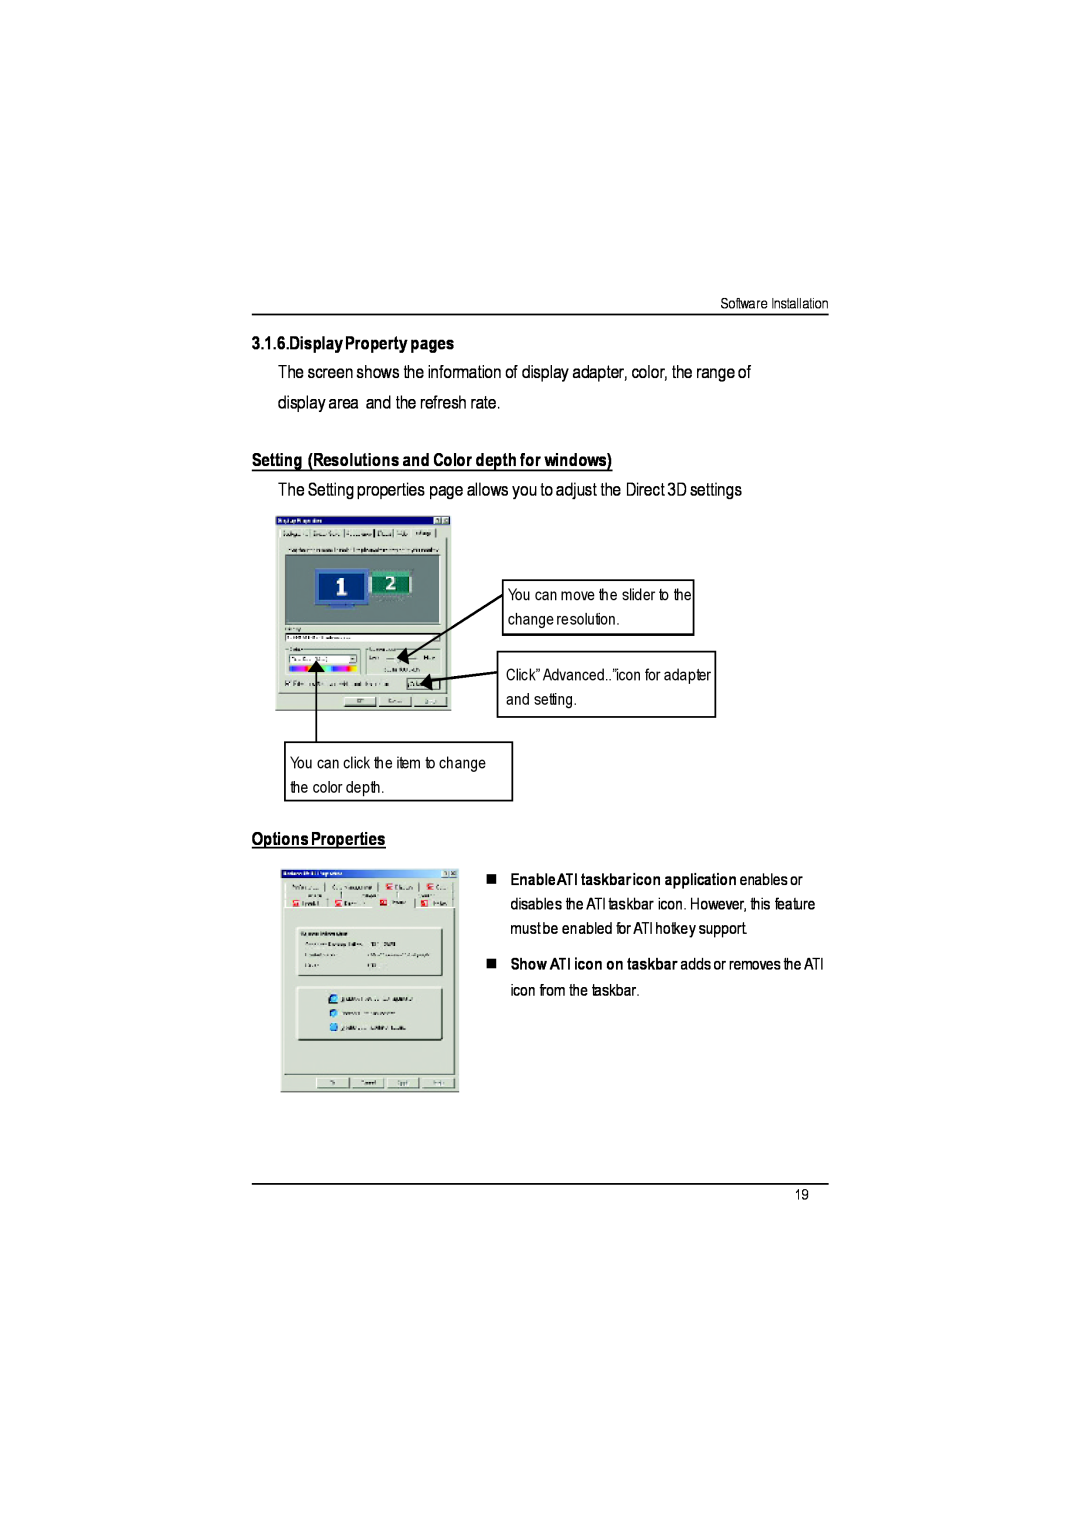 Gigabyte AP64D-H user manual Display Property pages, Setting Resolutions and Color depth for windows, Options Properties 